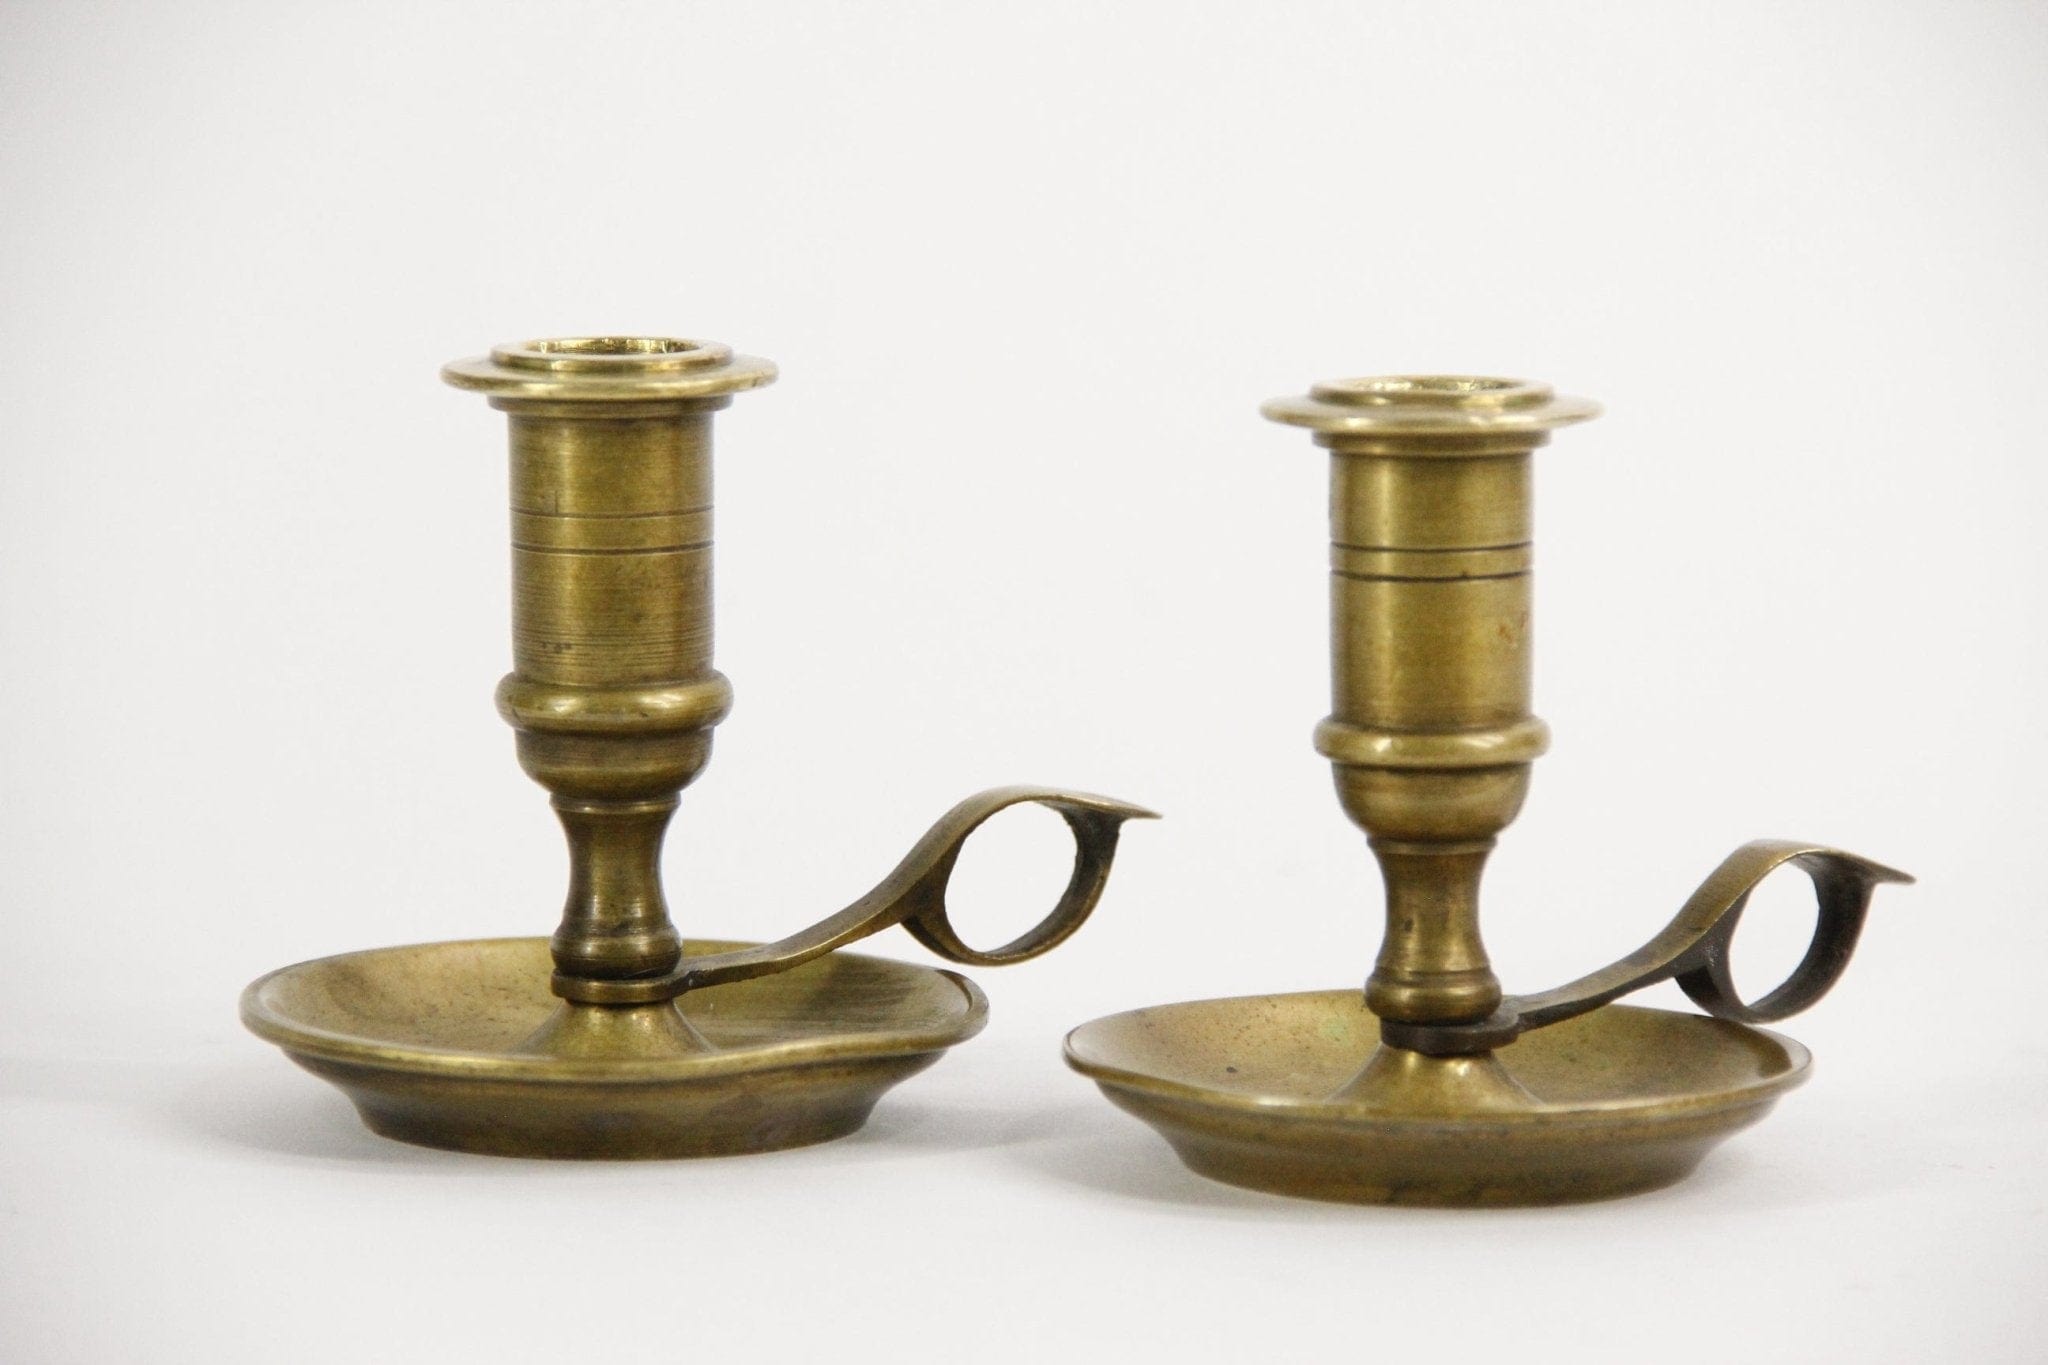 Antique Candle Holders Brass | Pair - Debra Hall Lifestyle